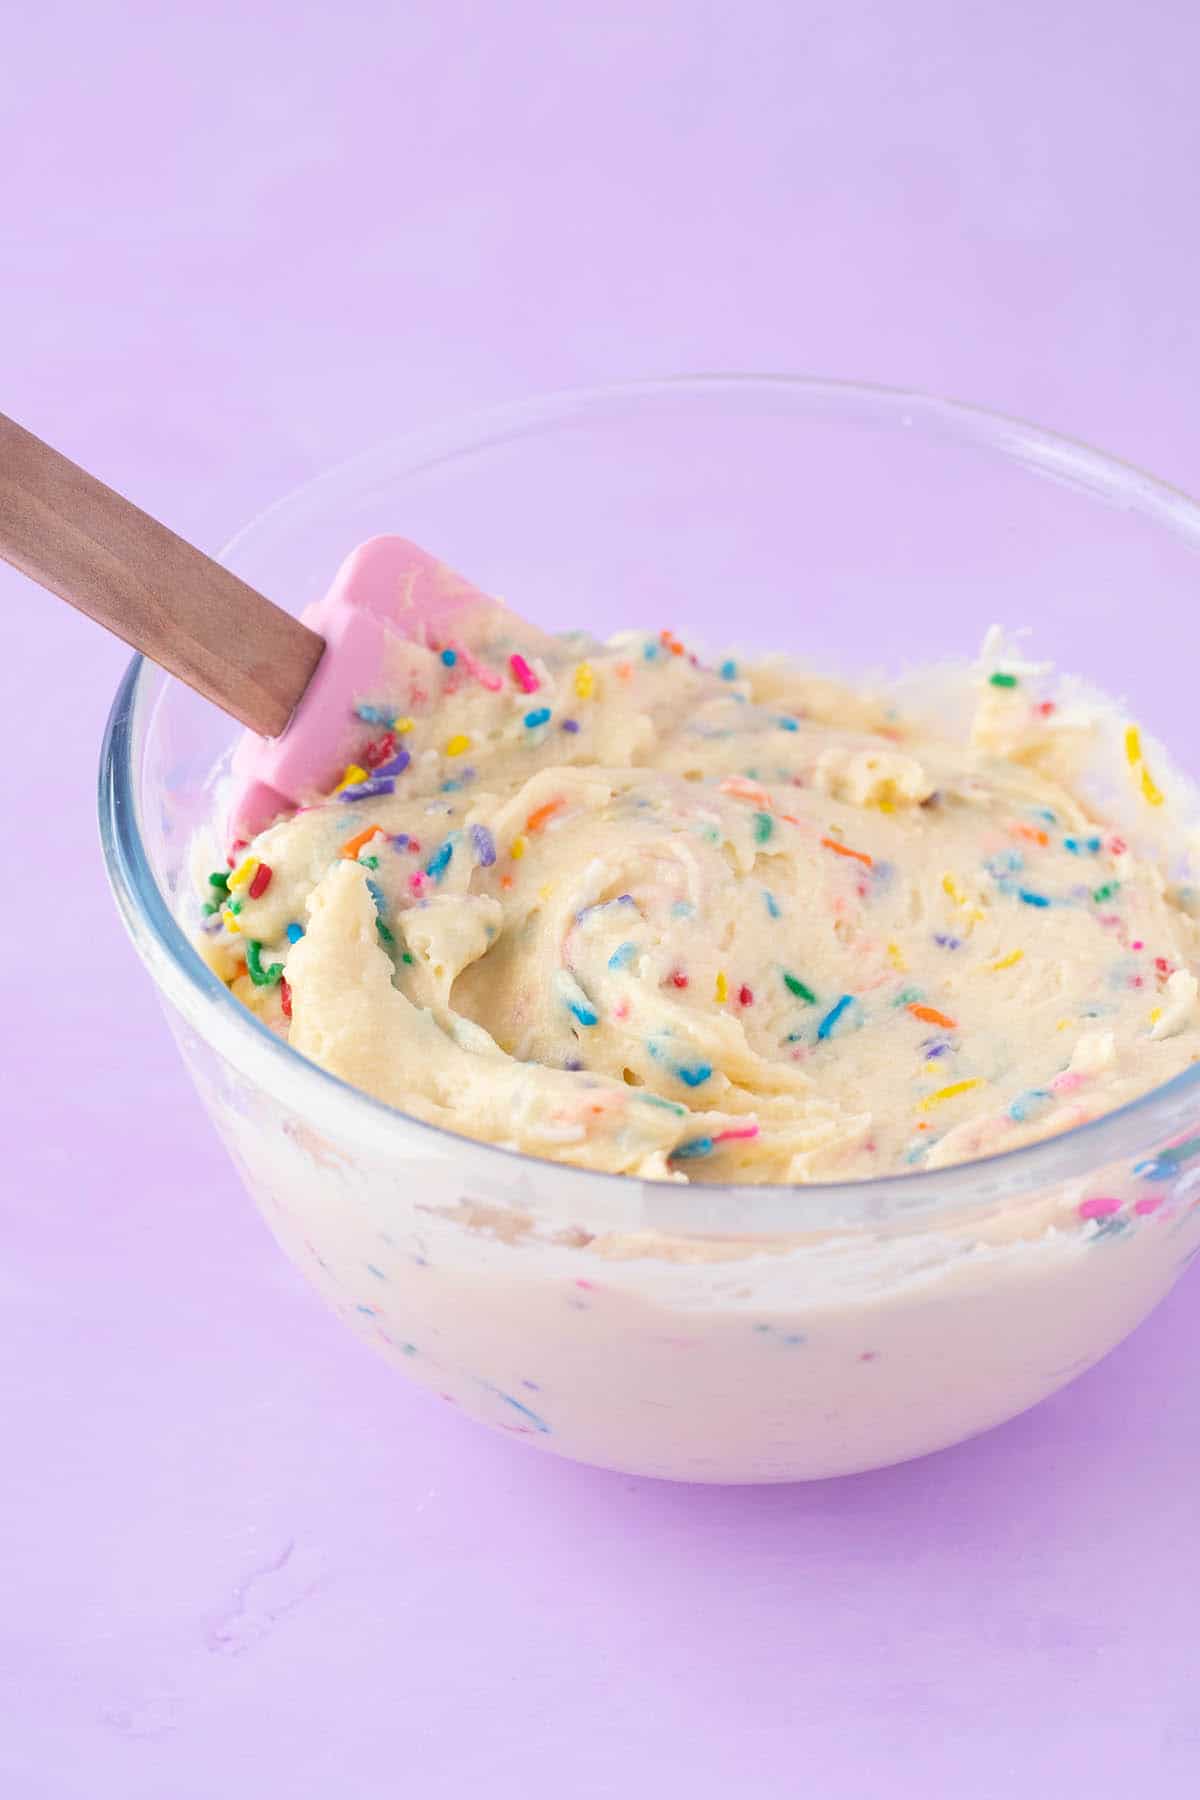 A glass bowl filled with cupcake batter.